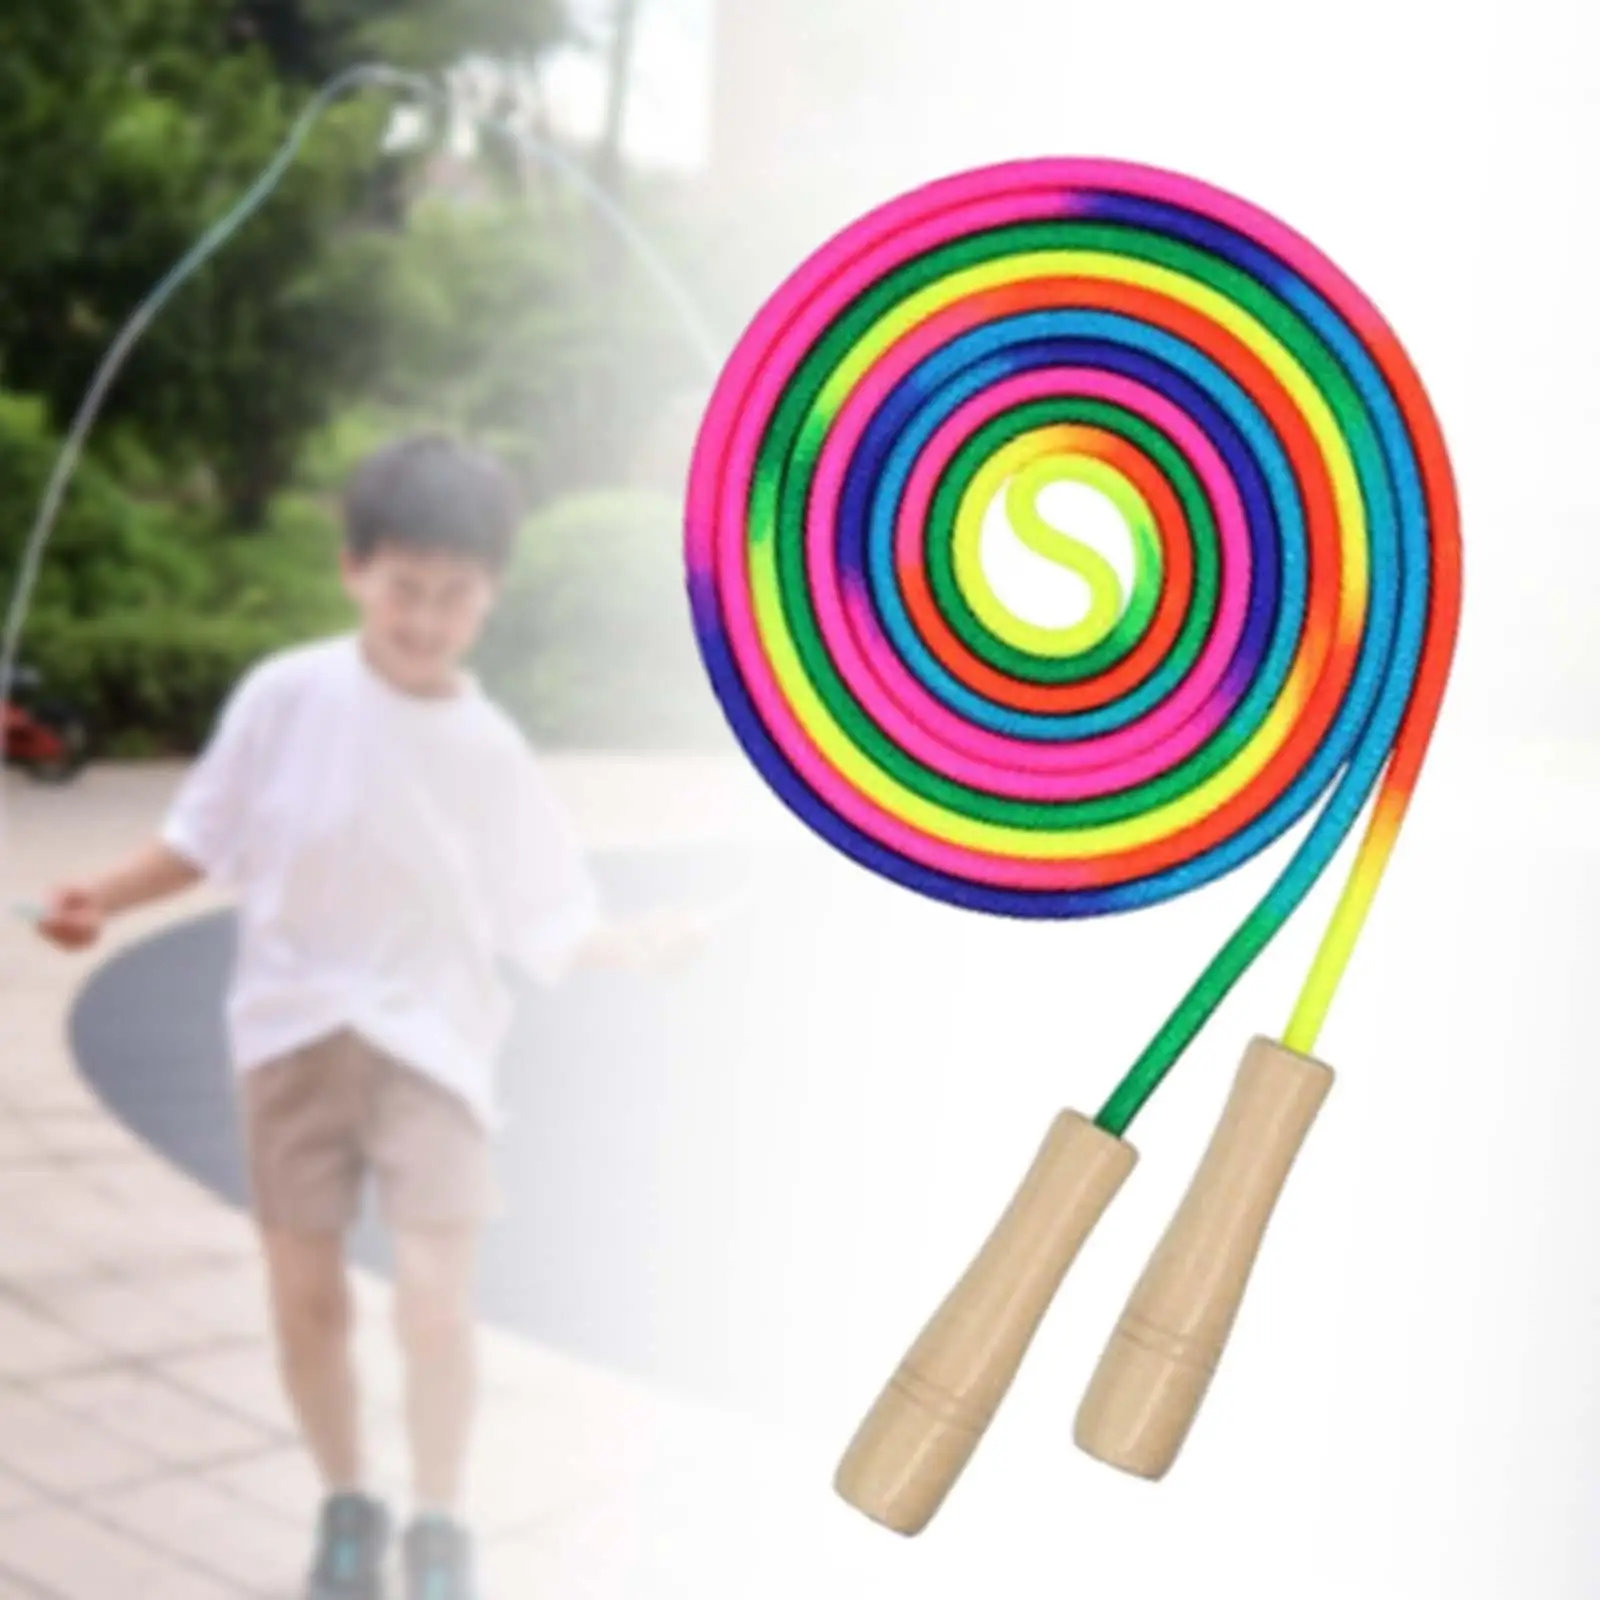 Jump Rope 9.2ft Fun Activities Children Develop Rainbow Skipping Rope for Home Gym Party Favors Indoor Outdoor Workout Training